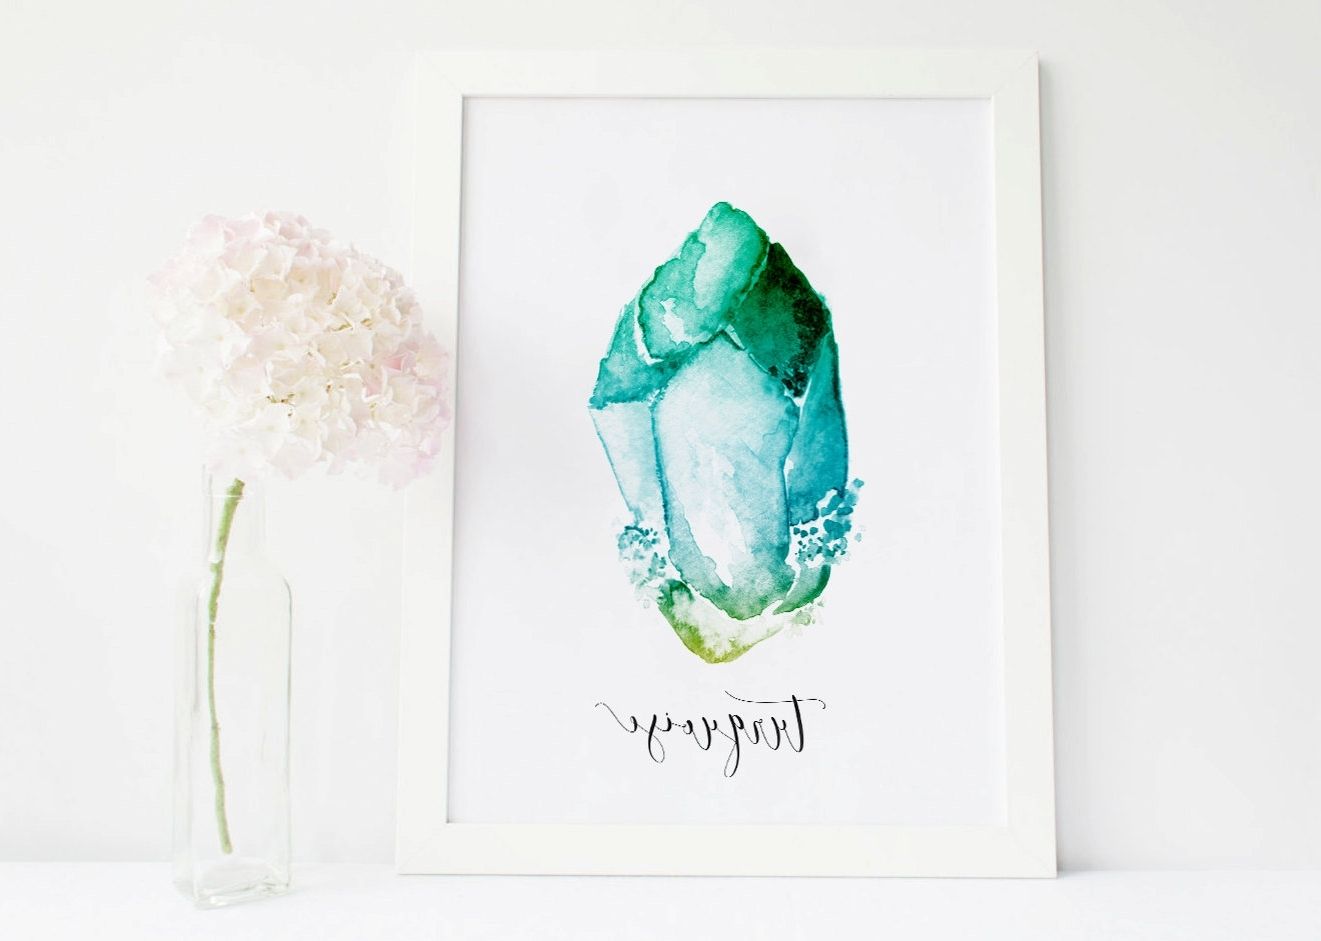 Gemstone Wall Art Throughout Trendy Turquoise Stone Turquoise Crystal Art Gemstone Decor Crystals (View 5 of 15)